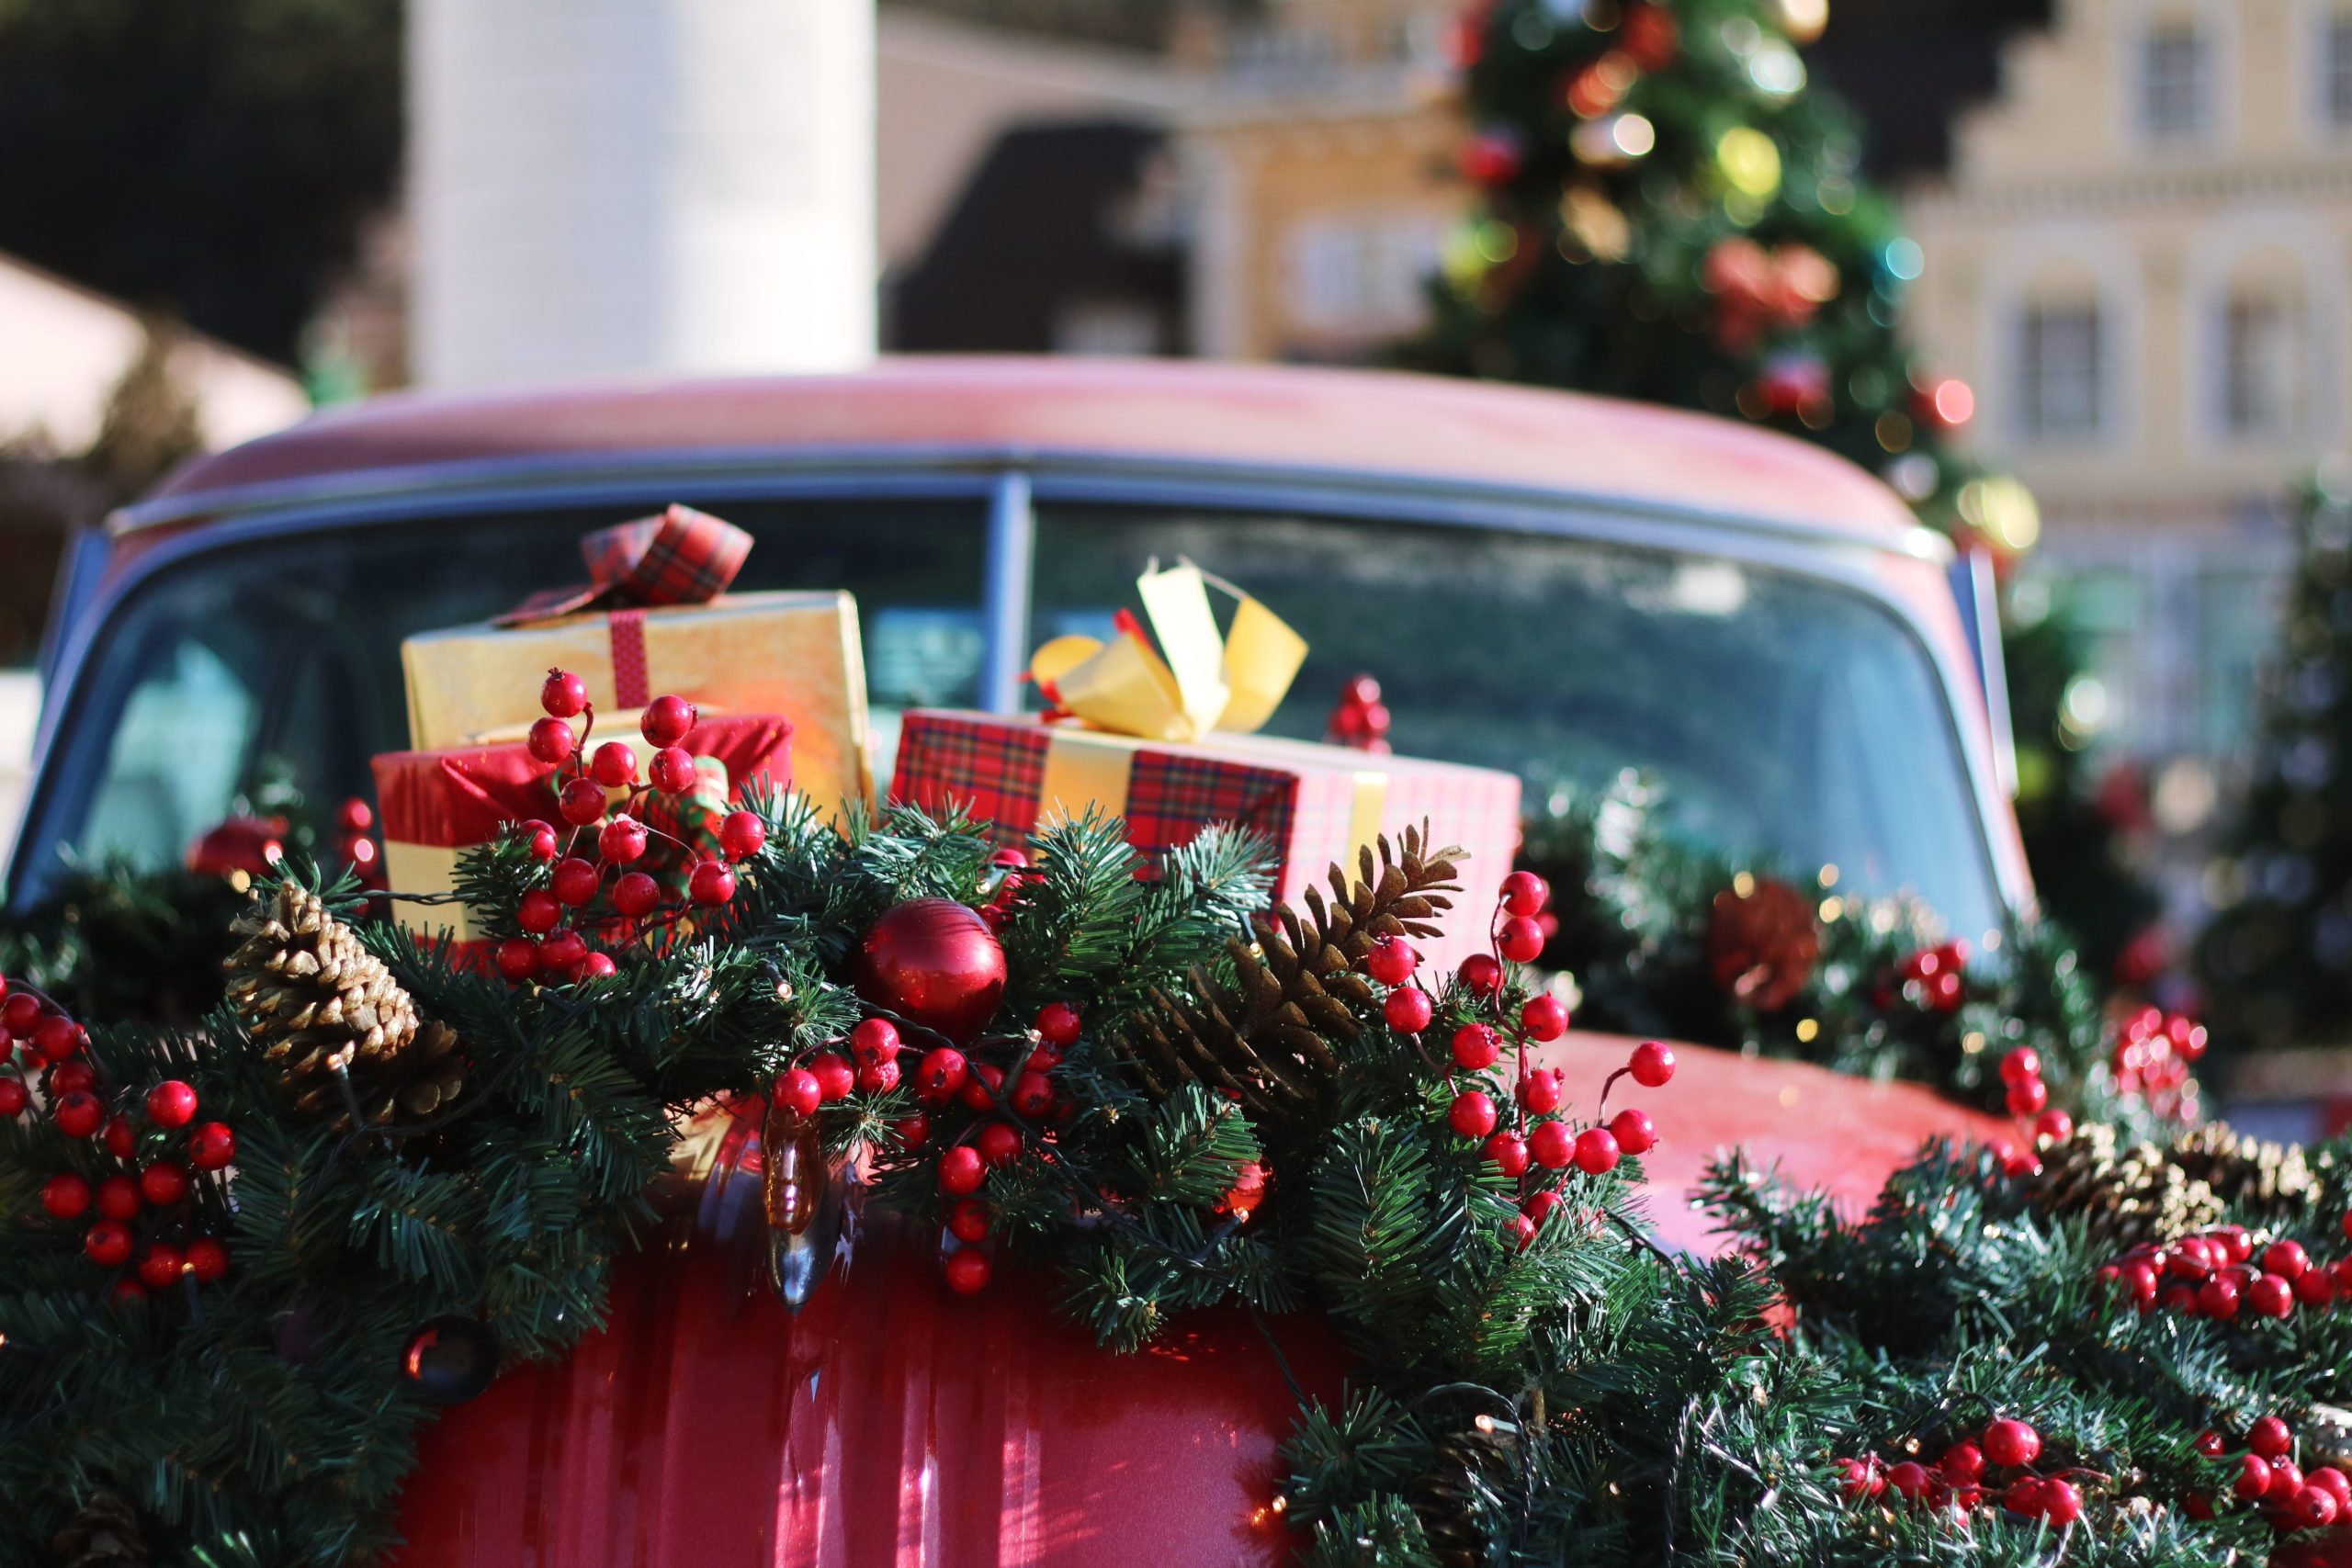 Festive survival kit: How to get your motoring fix this Christmas